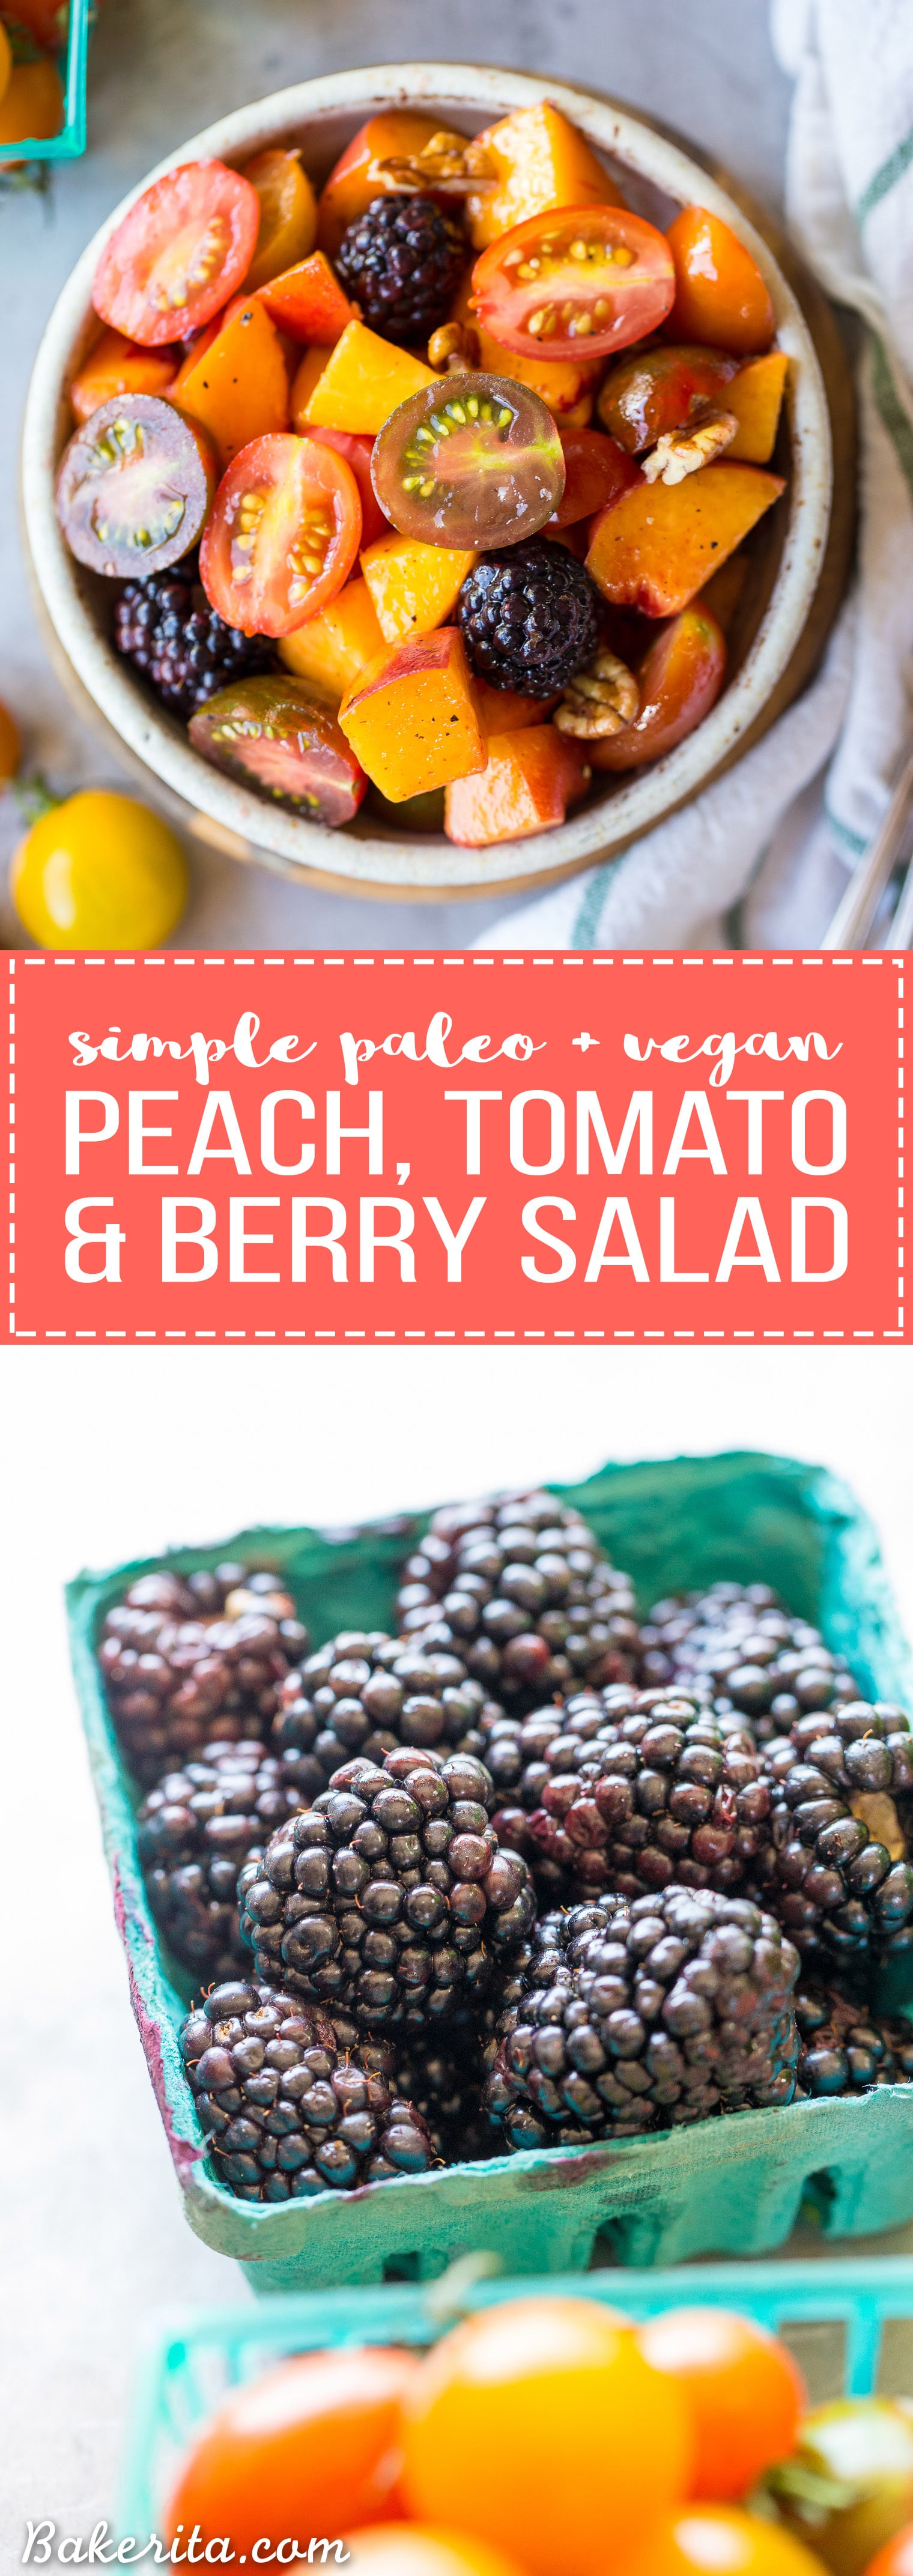 This Simple Peach & Tomato Salad makes the most of farmer's market produce. This healthy side dish is gluten-free, paleo, vegan + Whole30-friendly.